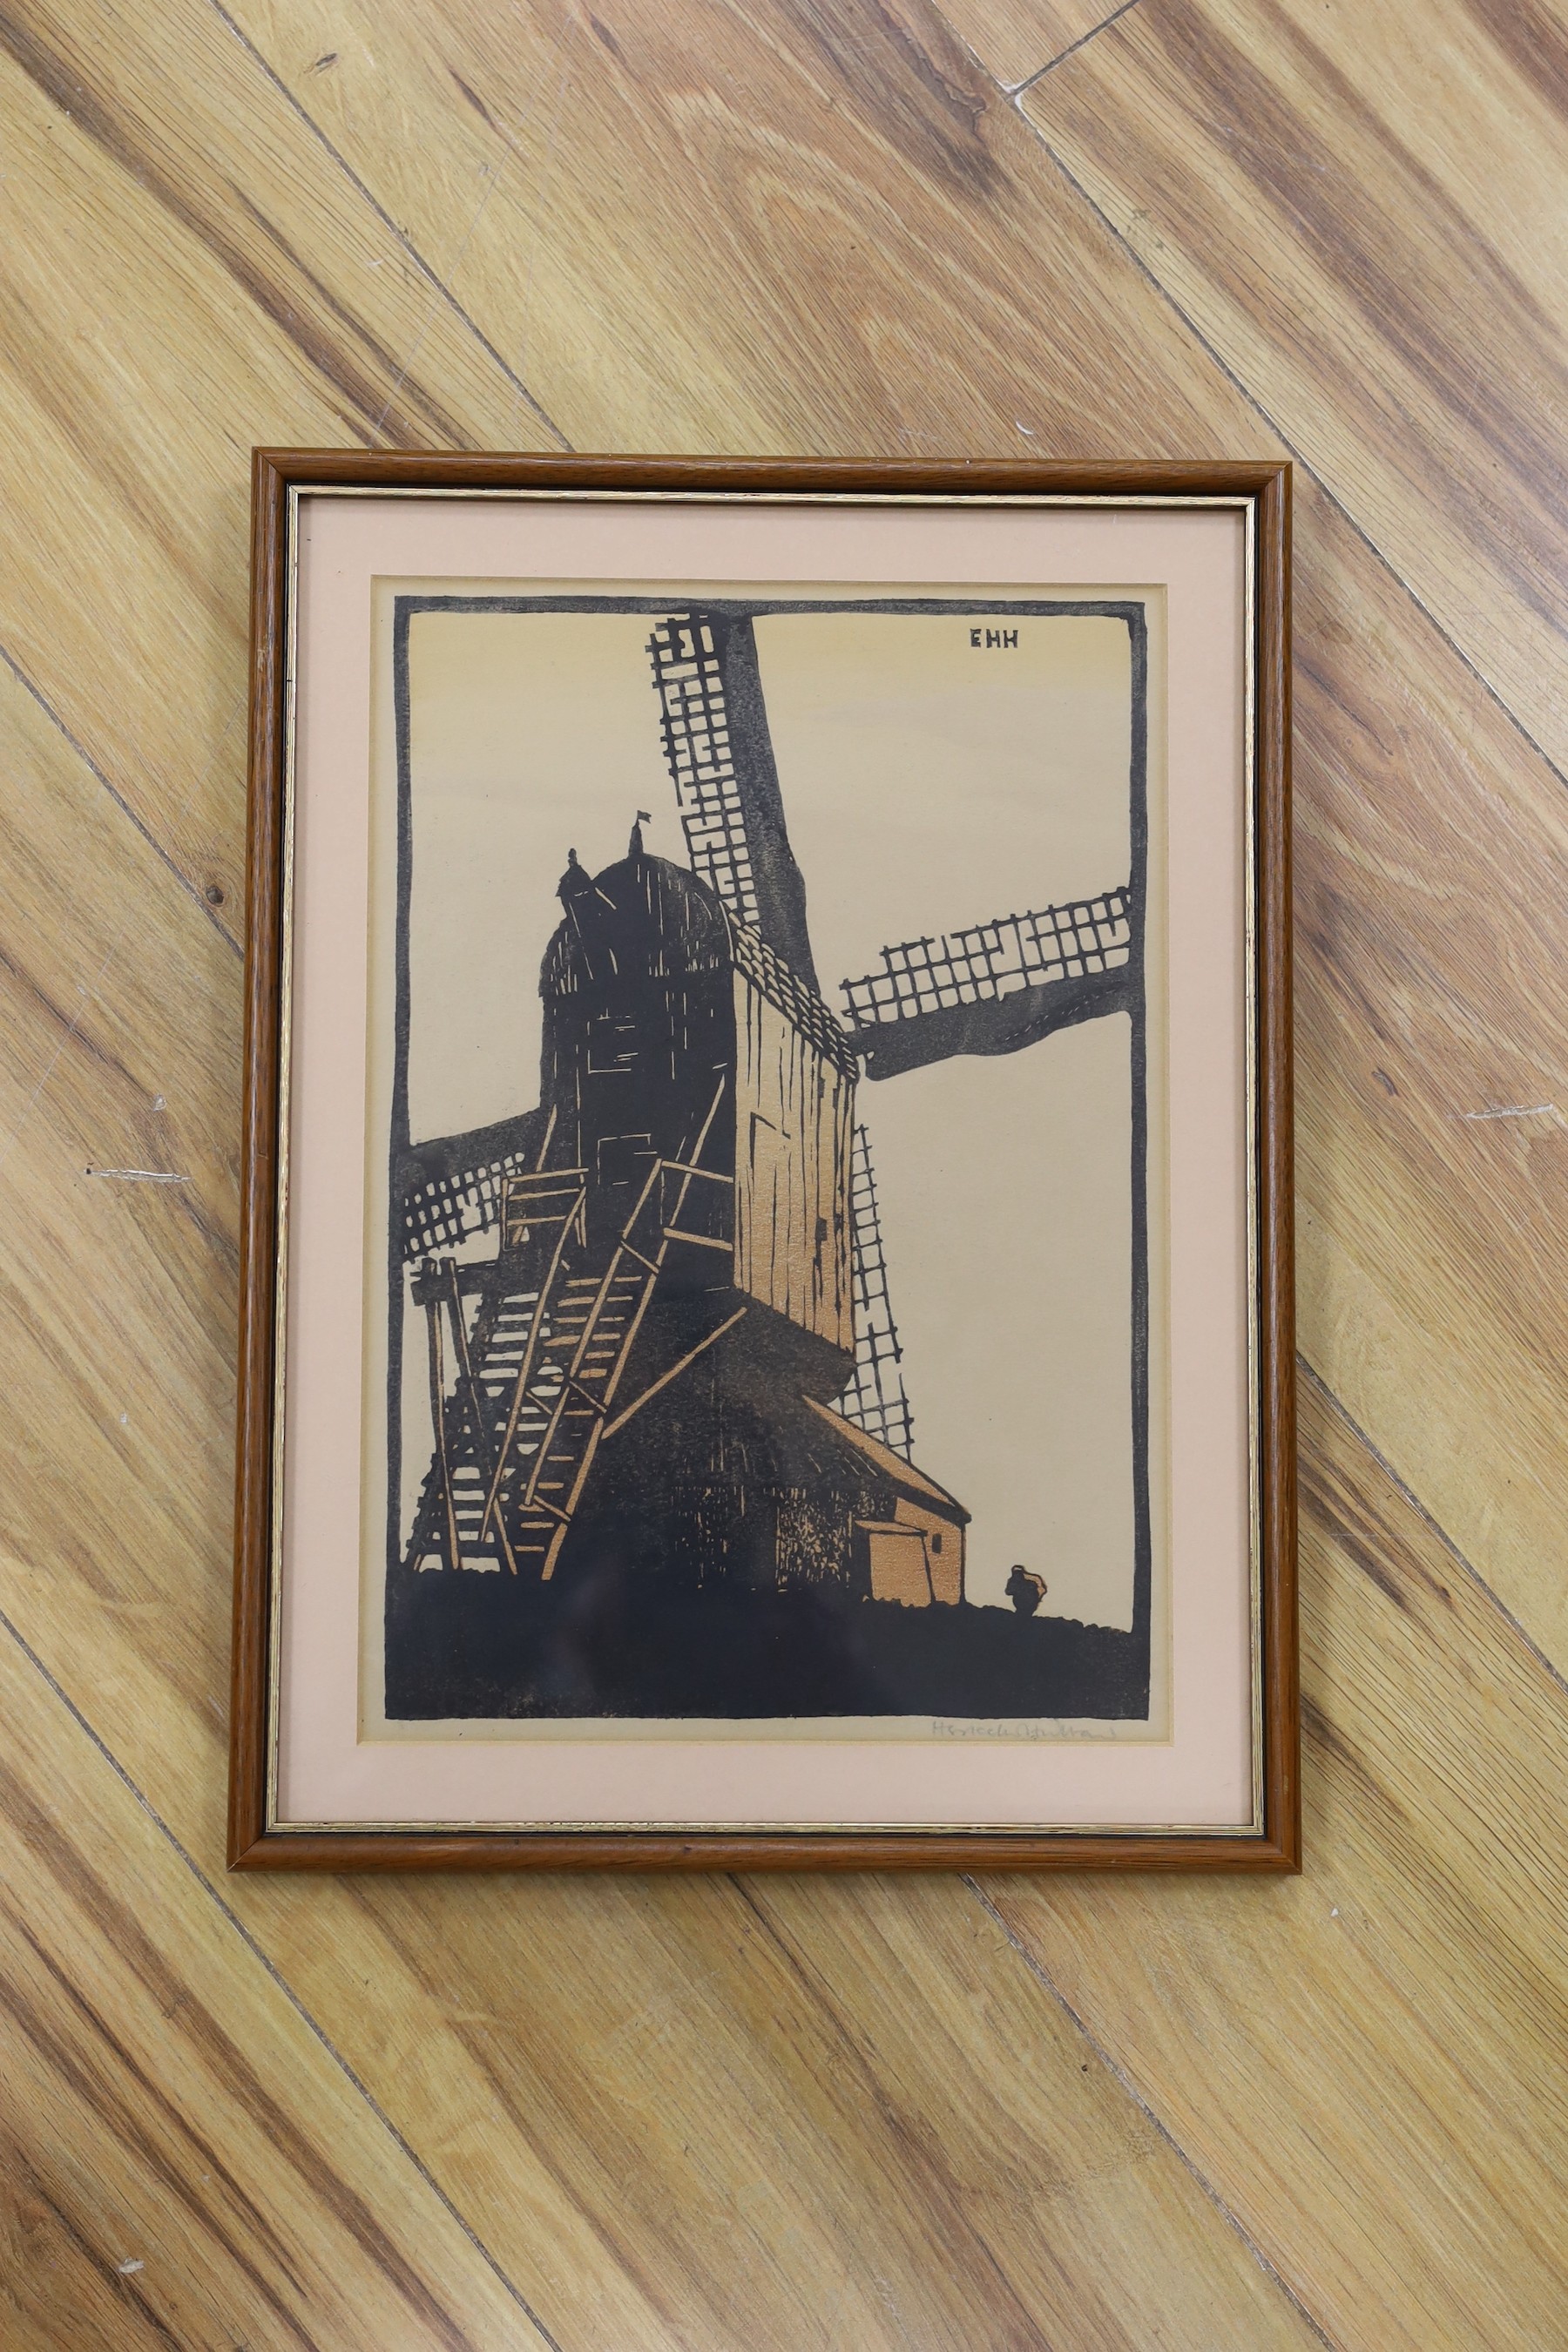 Eric Hesketh Hubbard (1892-1957), wood engraving, 'Windmill, Enkhuisen, Holland', signed in pencil, 31 x 21cm